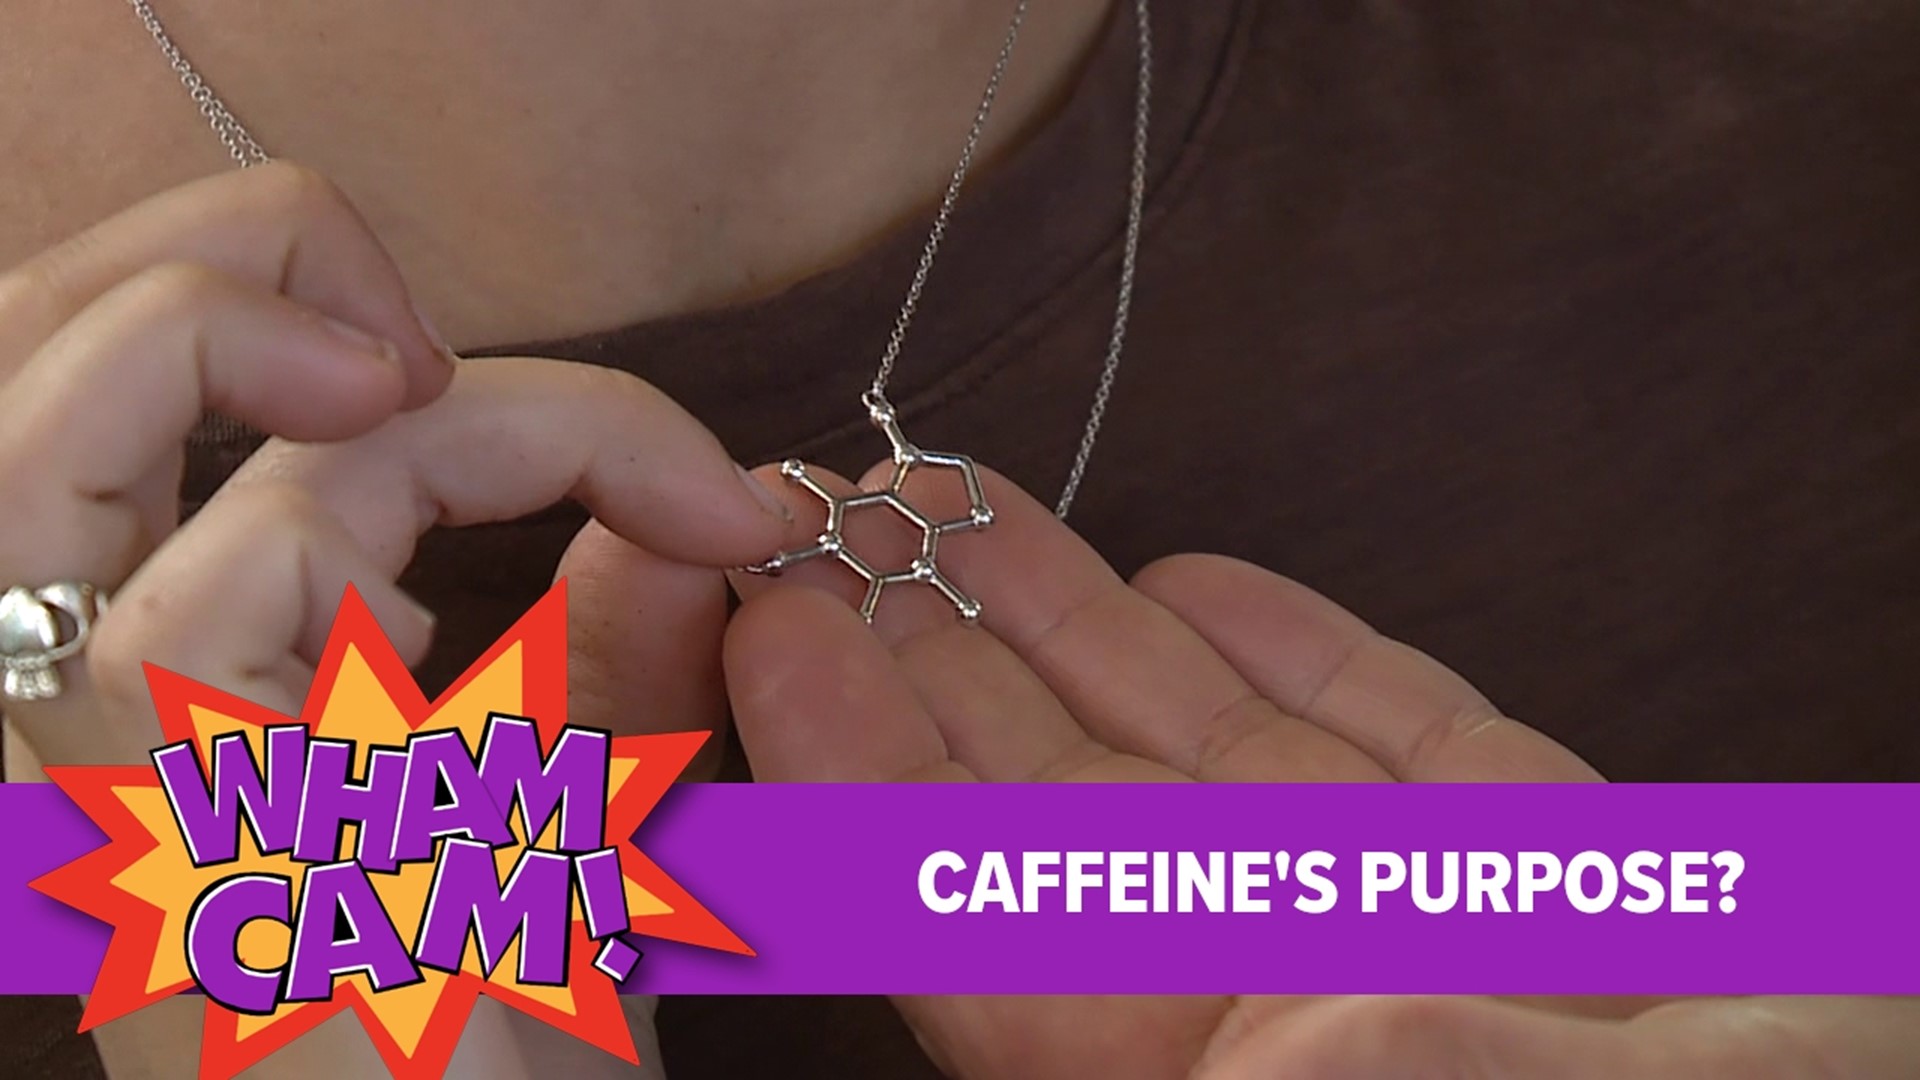 Joe's talking caffeine in this week's Wham Cam. He wants to know where it comes from and what its purpose is.